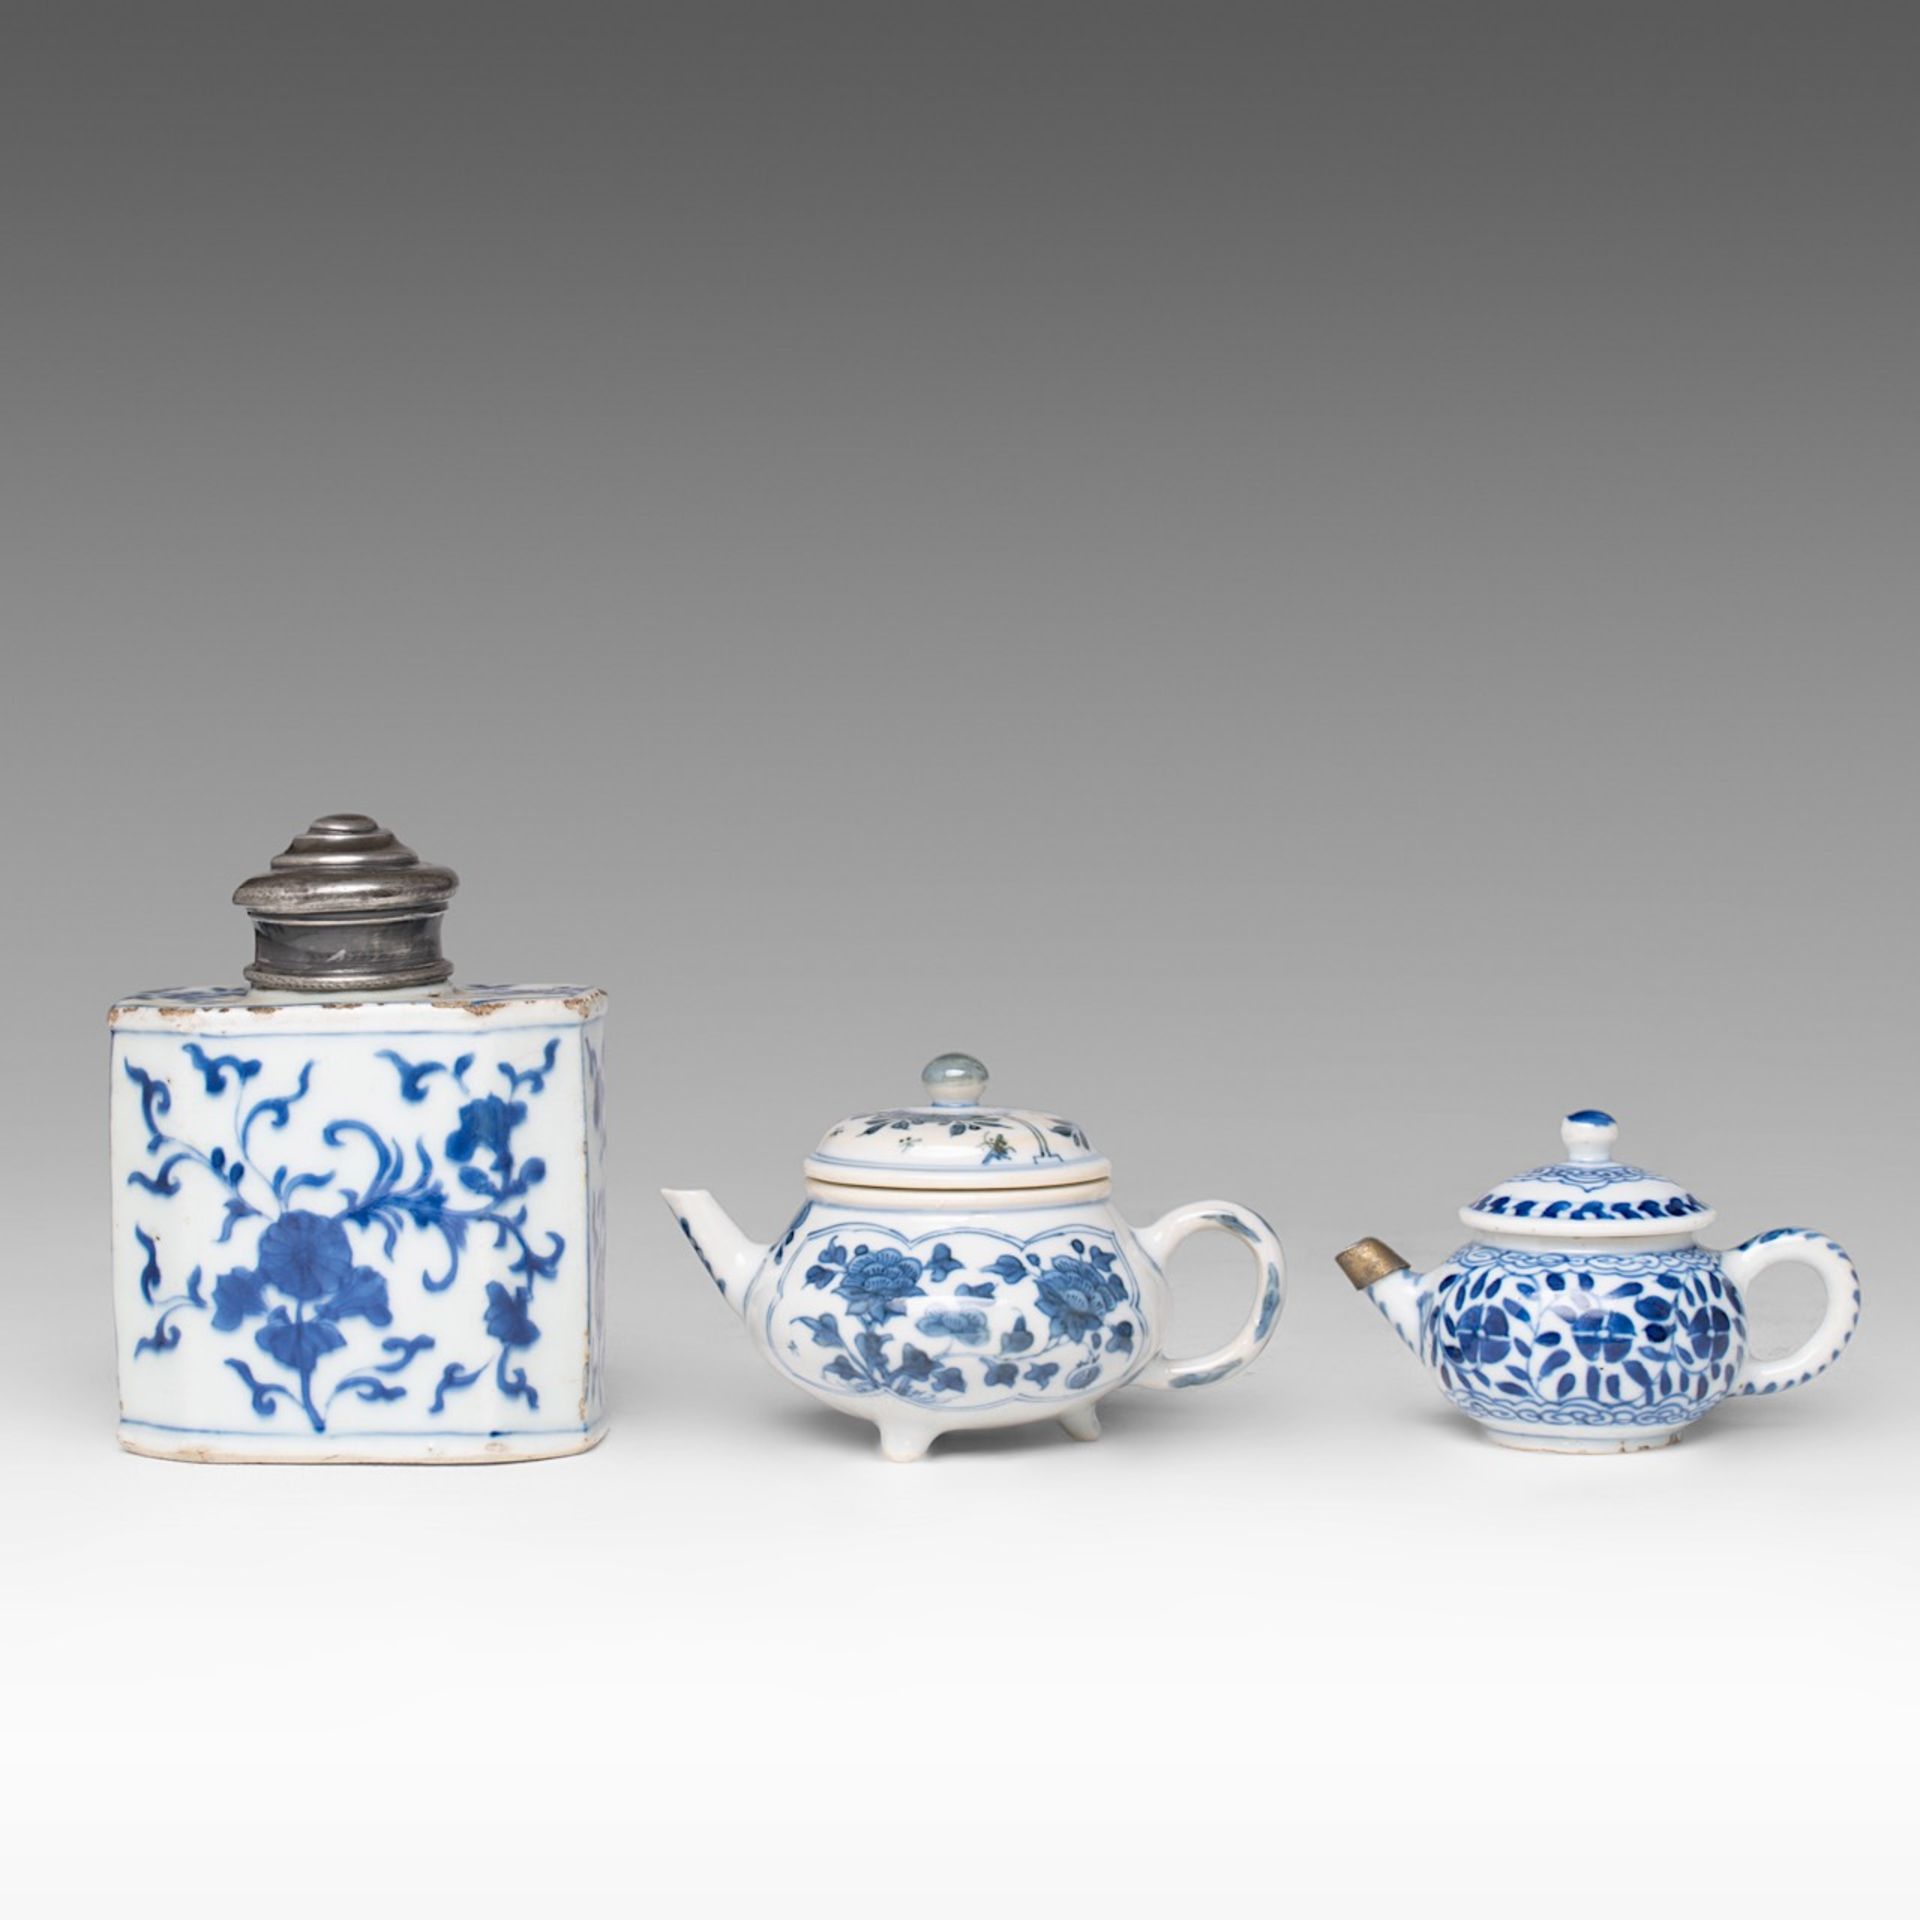 A small collection of three Chinese blue and white floral decorated tea ware, Kangxi period and 18th